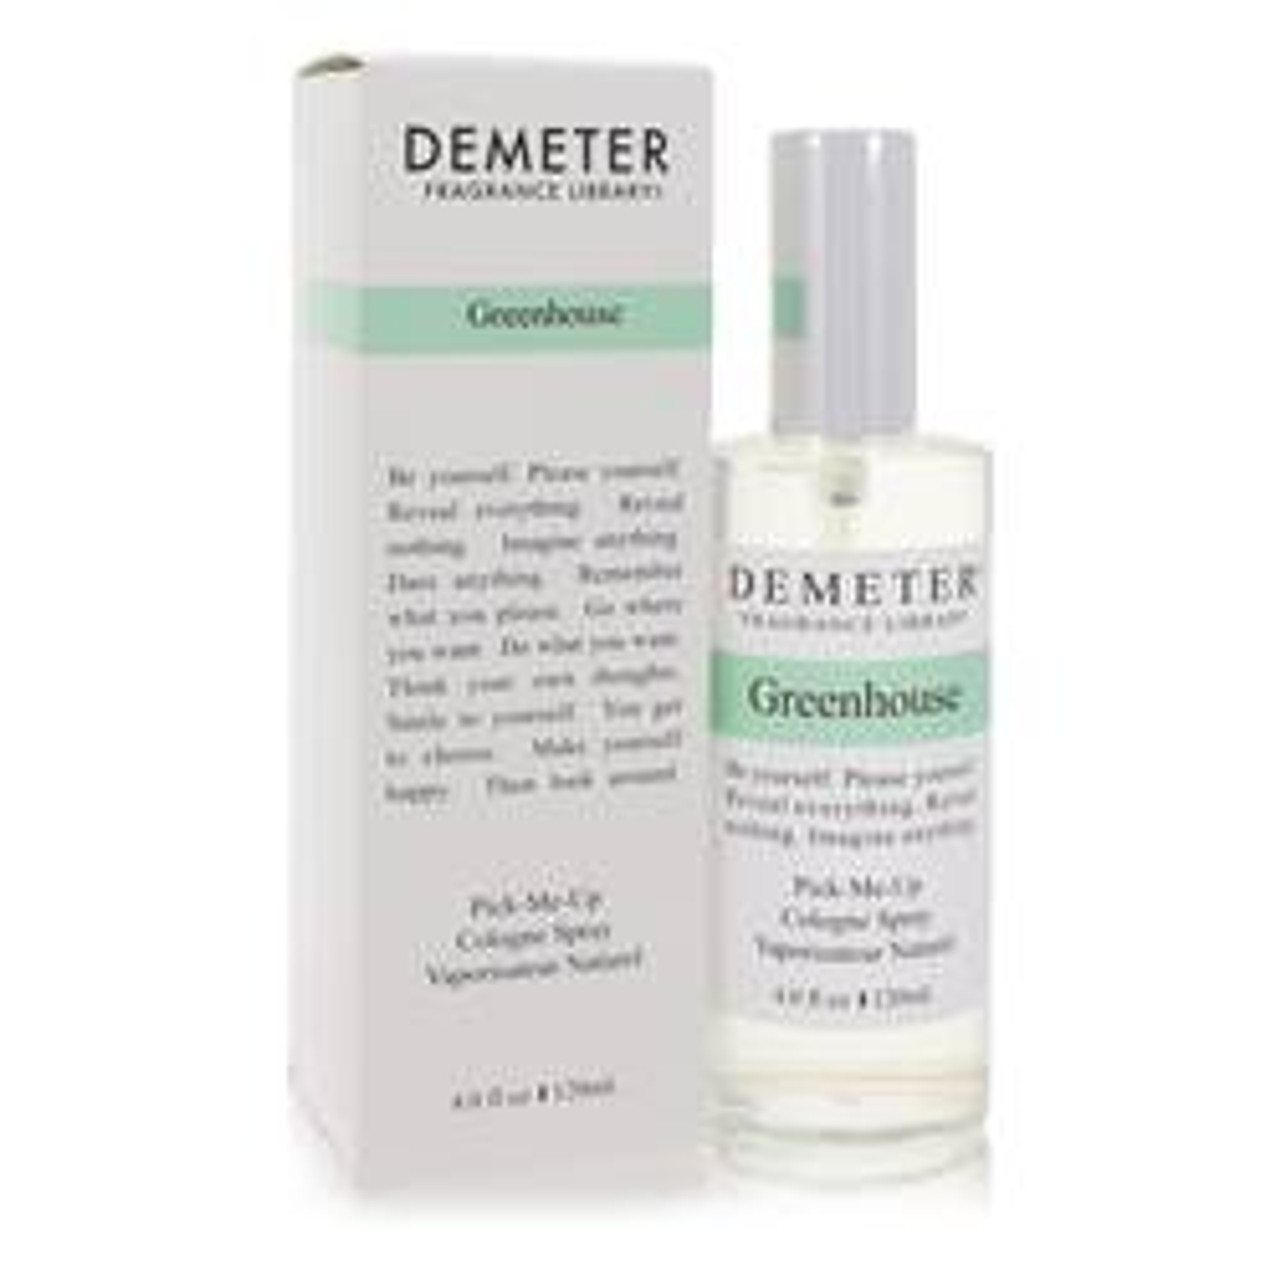 Demeter Greenhouse Perfume By Demeter Cologne Spray 4 oz for Women - [From 79.50 - Choose pk Qty ] - *Ships from Miami